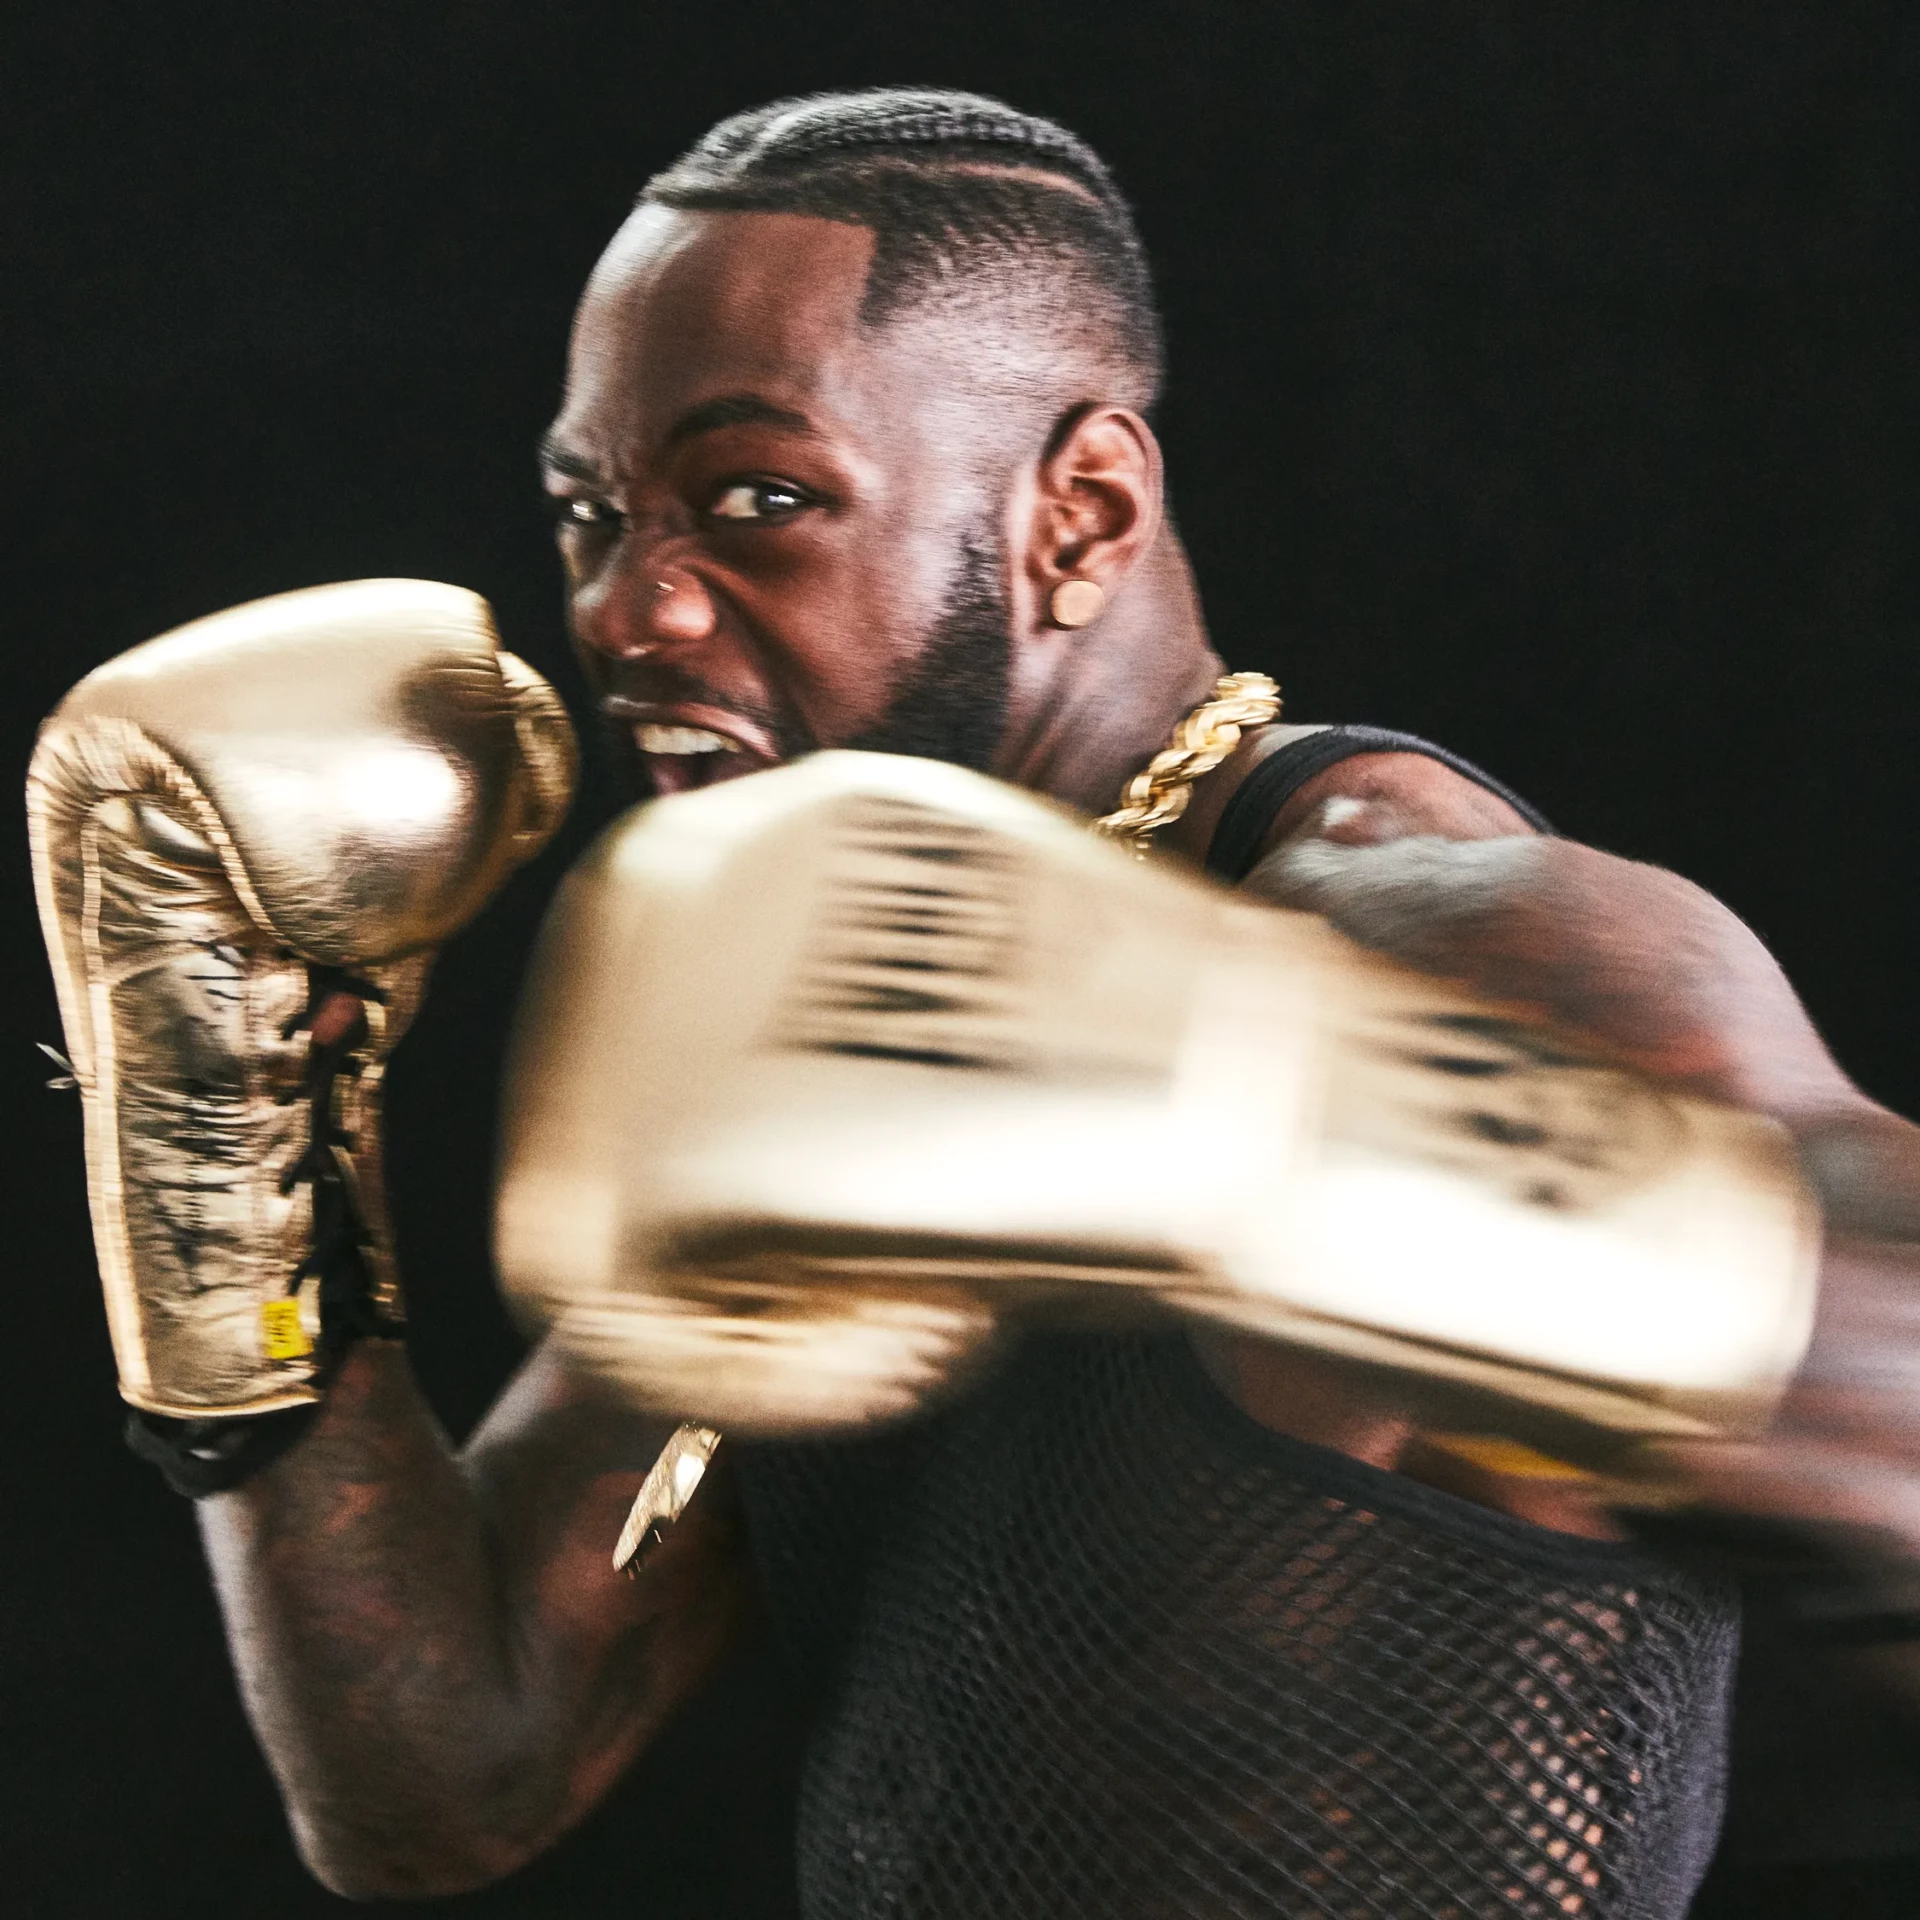 Wilder Calls Out Usyk - 'I've Rededicated Myself'